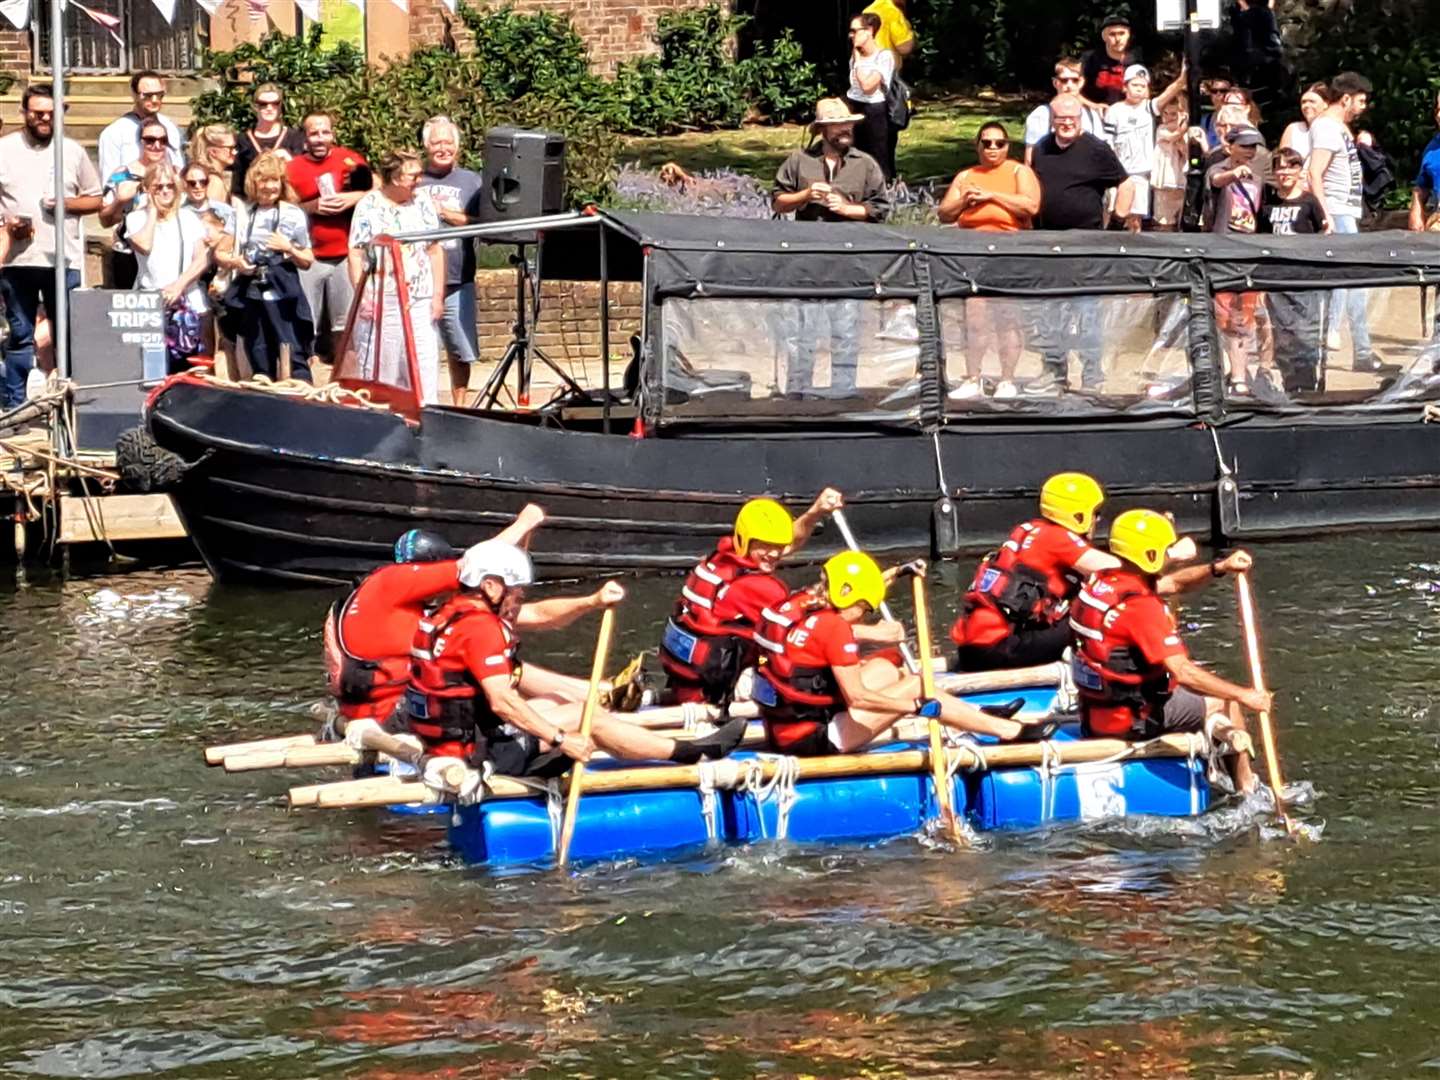 A scene from the raft race